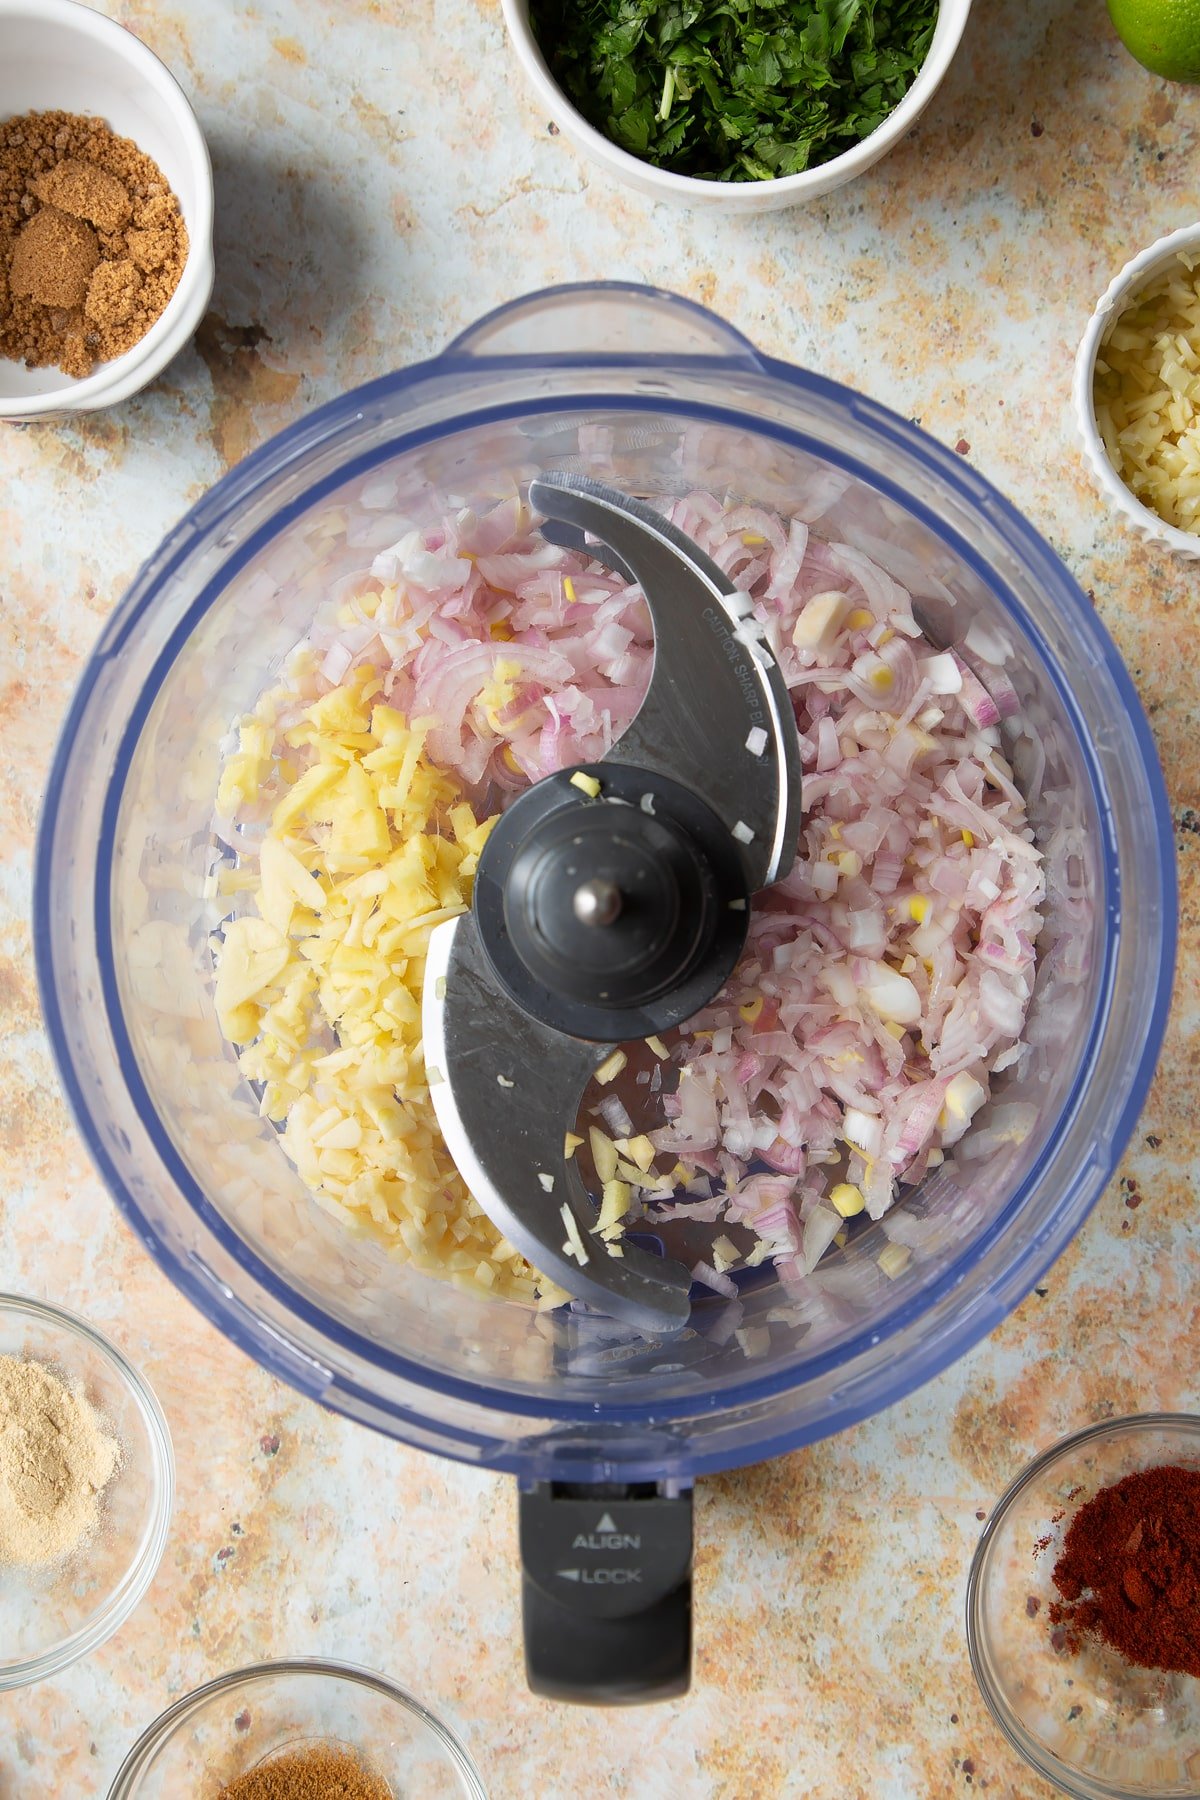 Chopped onion, ginger and garlic in a food processor bowl. Ingredients to make vegetarian yellow curry surround the bowl.